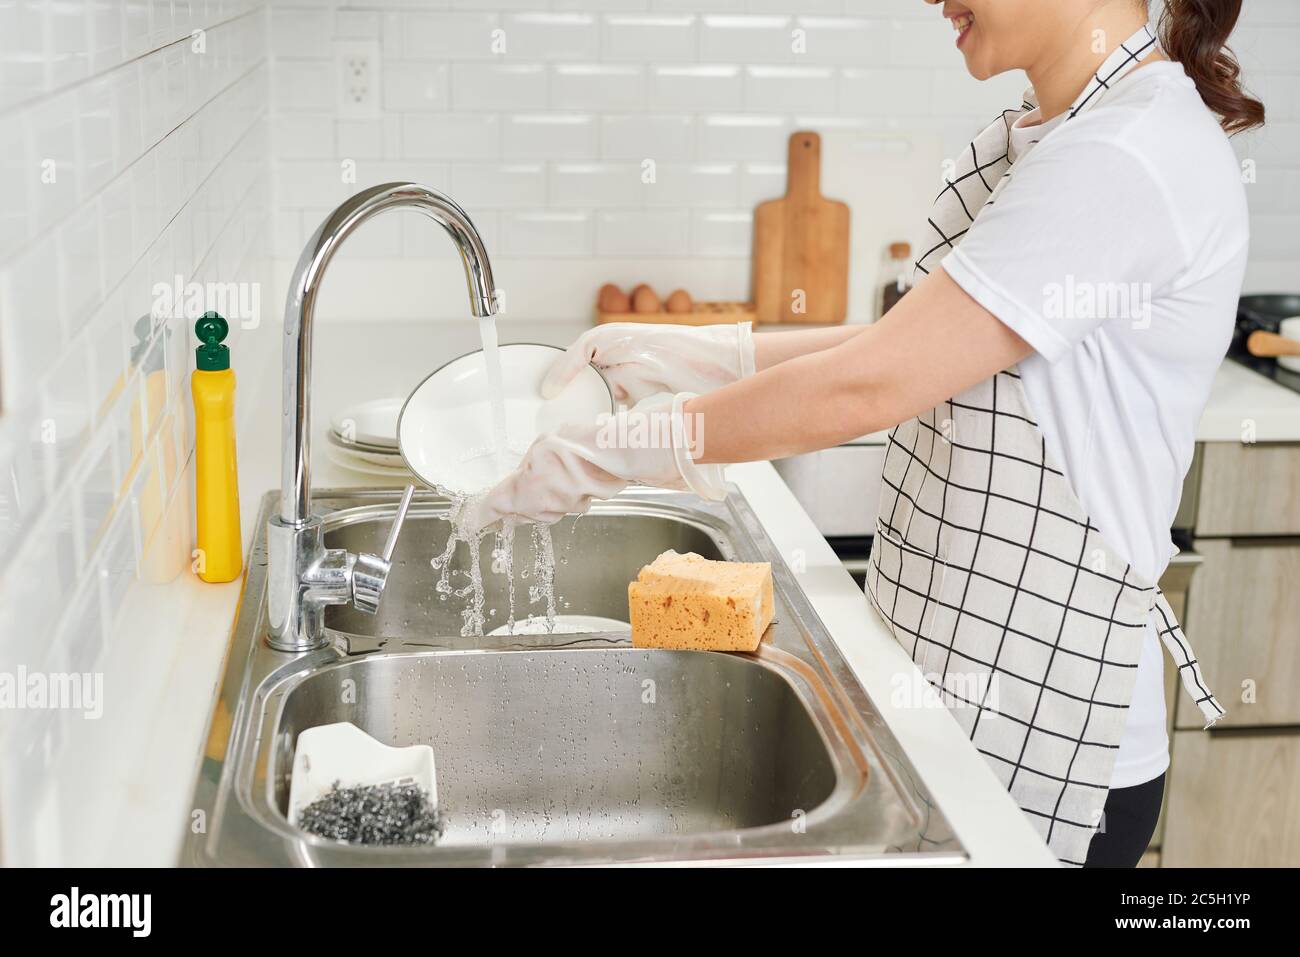 https://c8.alamy.com/comp/2C5H1YP/beautiful-smiling-young-woman-washing-the-dishes-in-modern-white-kitchen-2C5H1YP.jpg